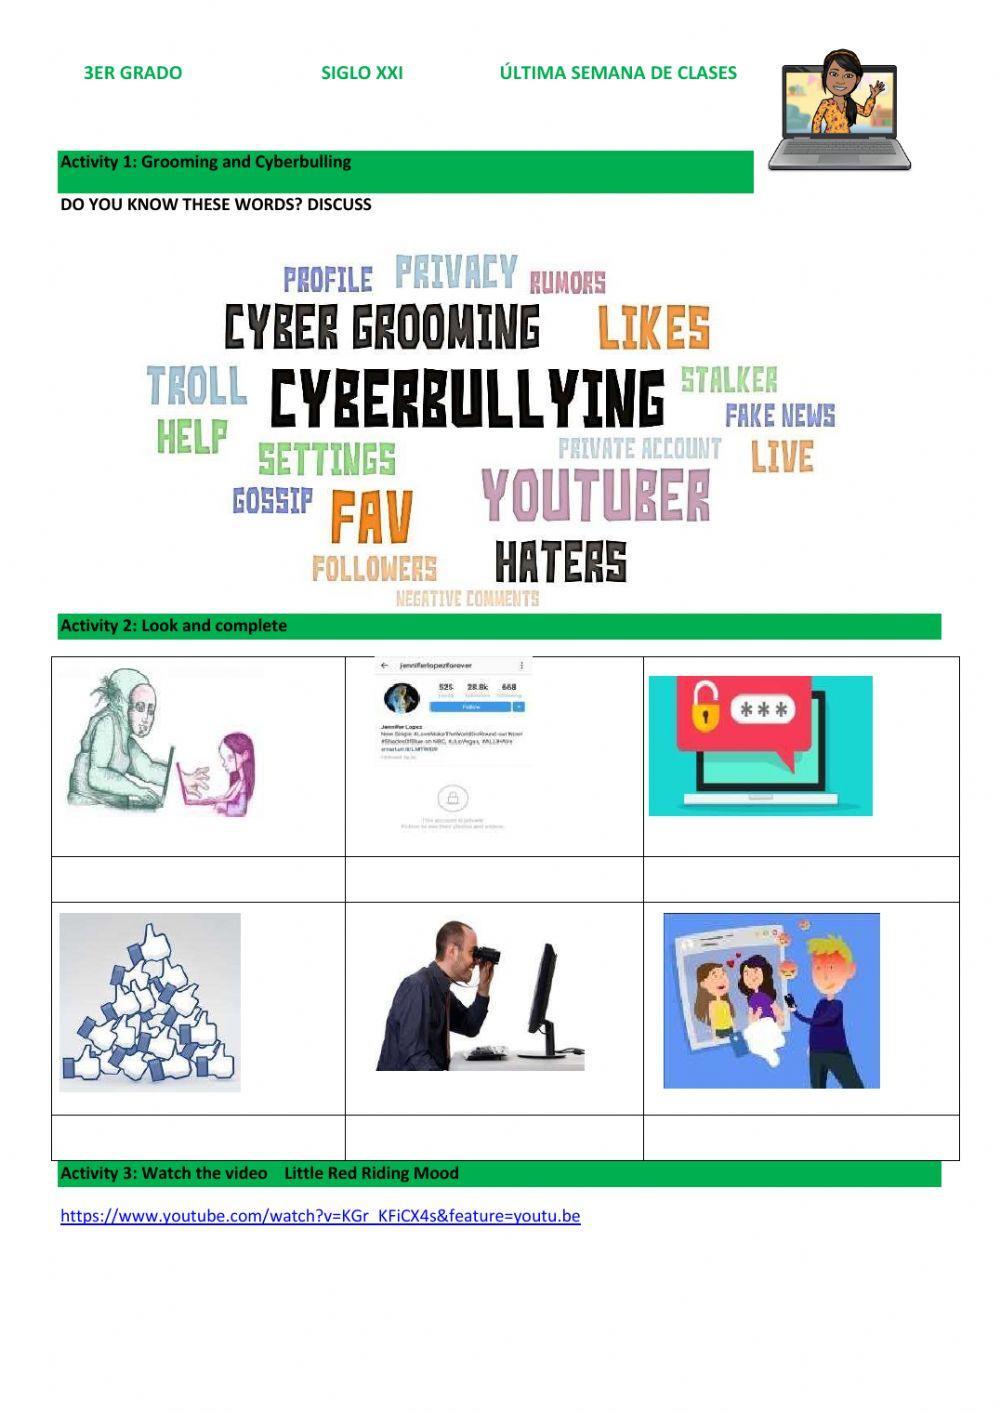 Grooming and cyberbulling